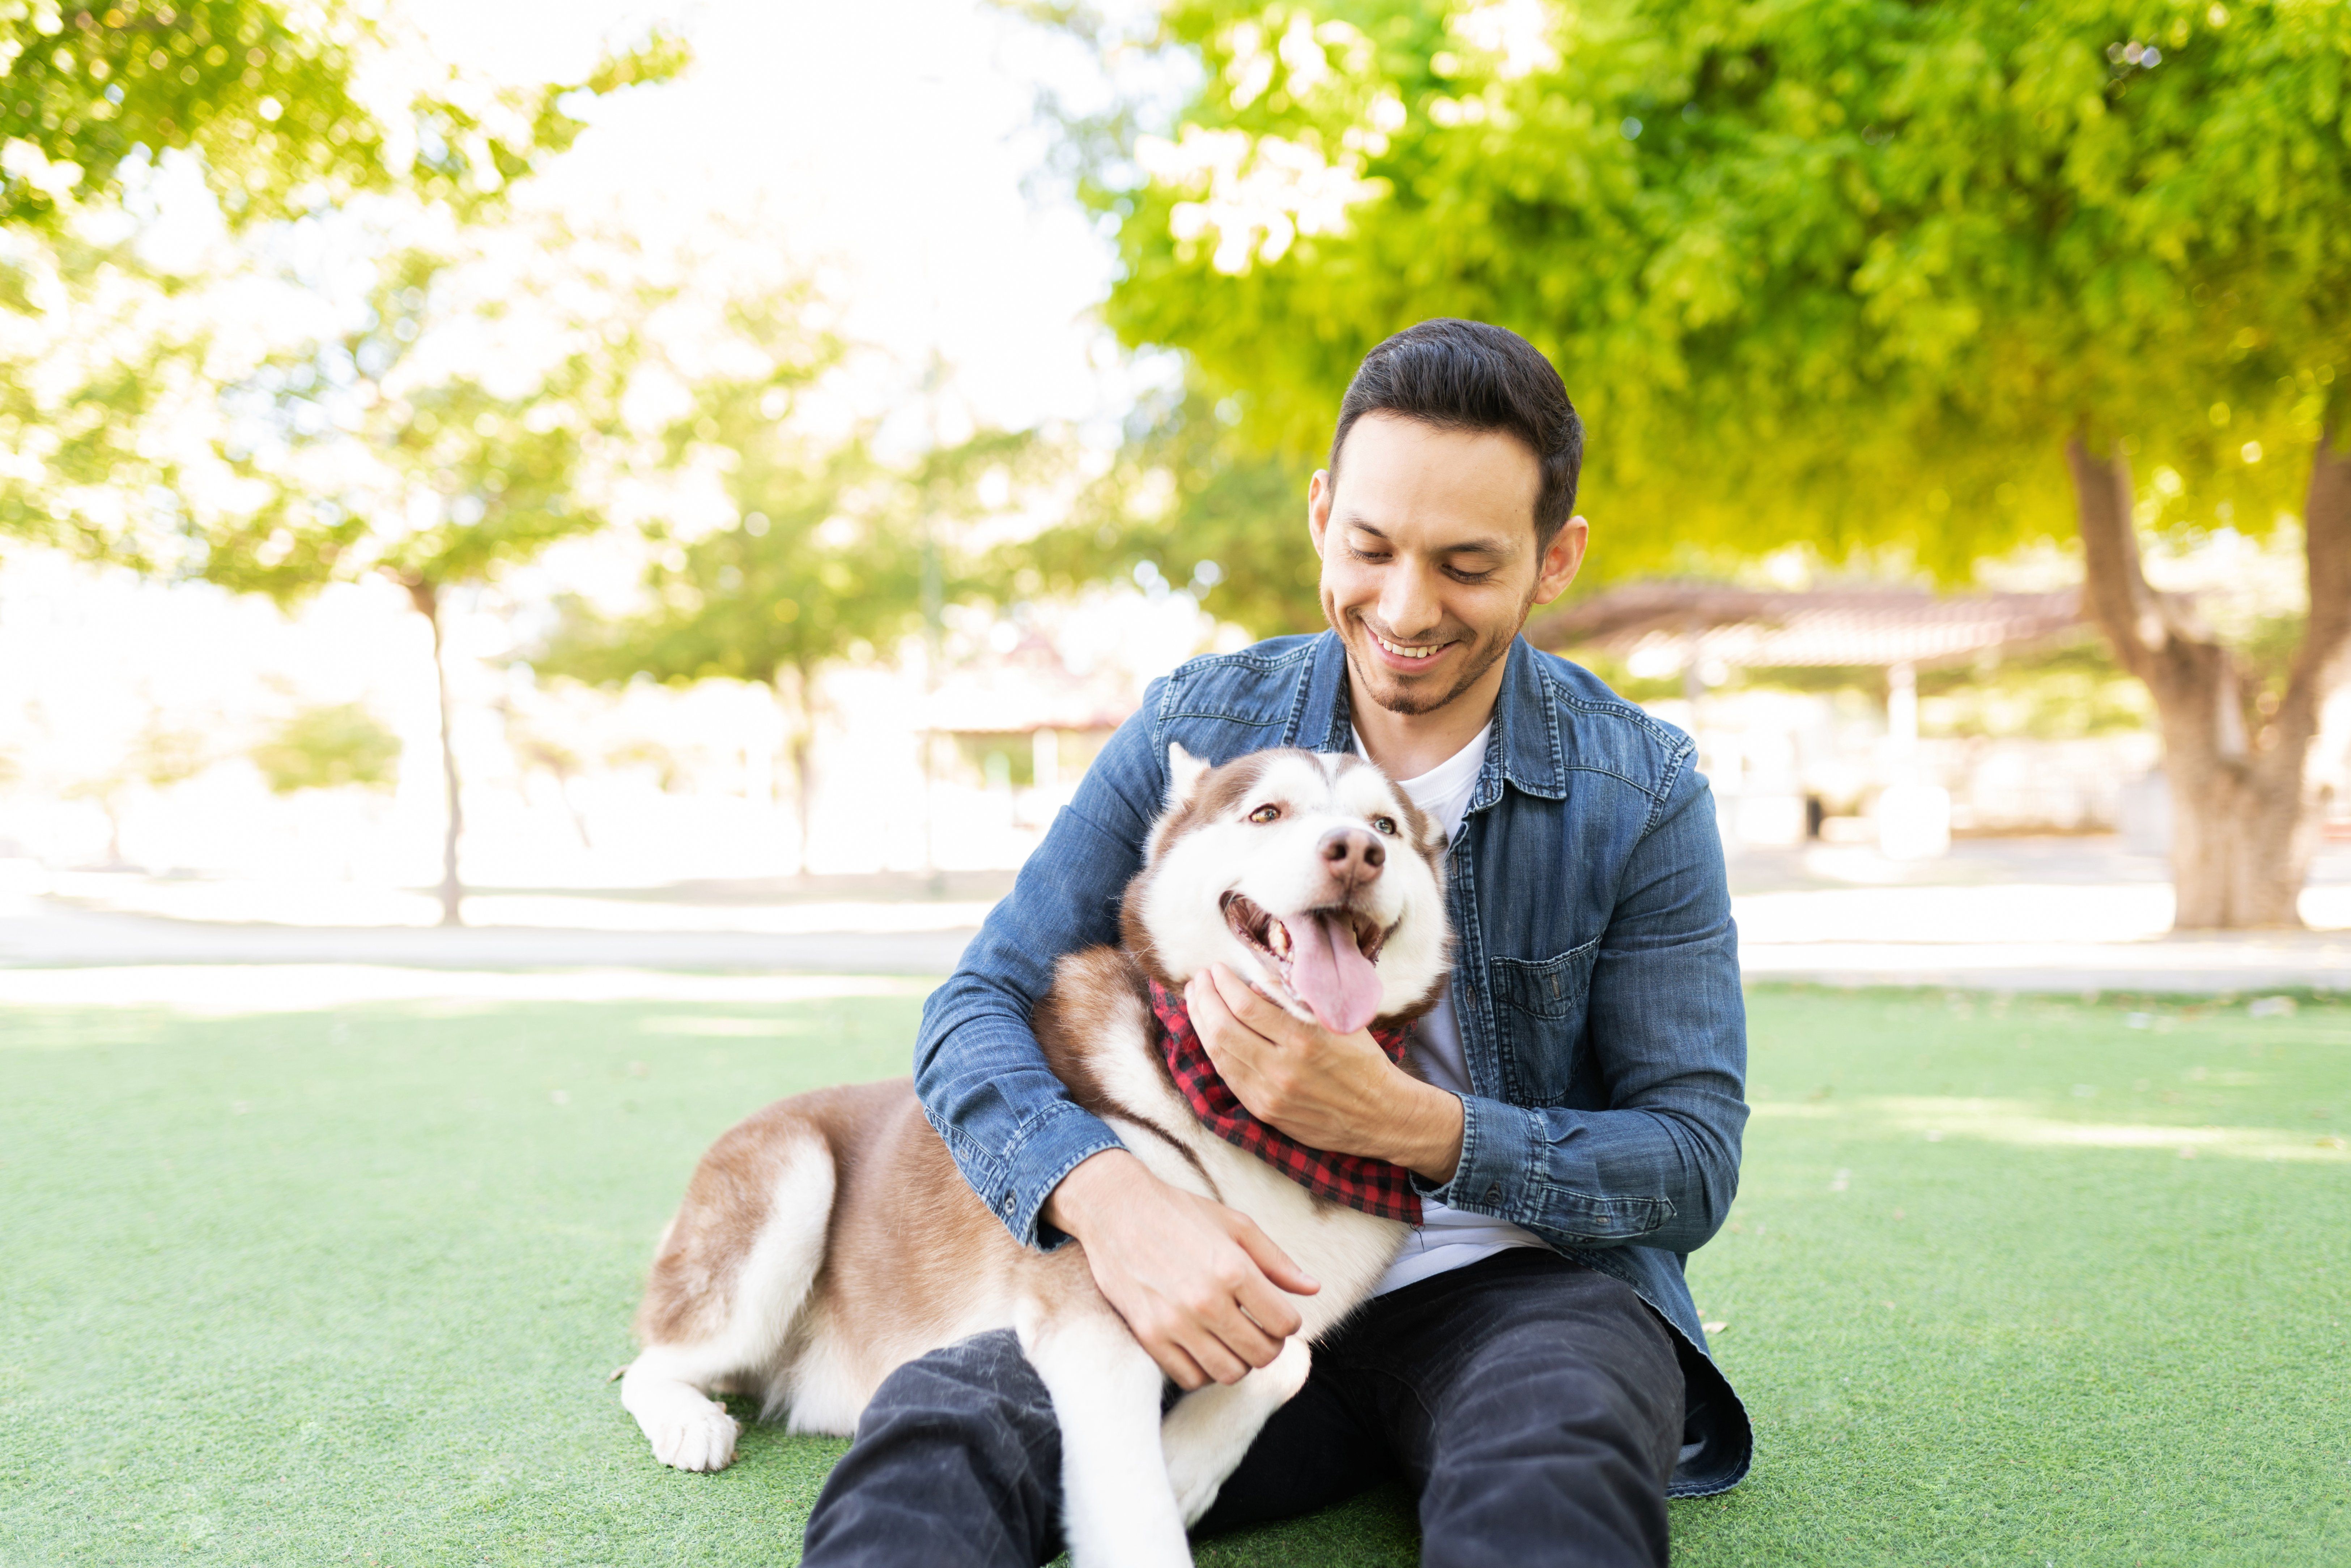 Pet-friendly Activities to Do in Mountain View, California Year-round